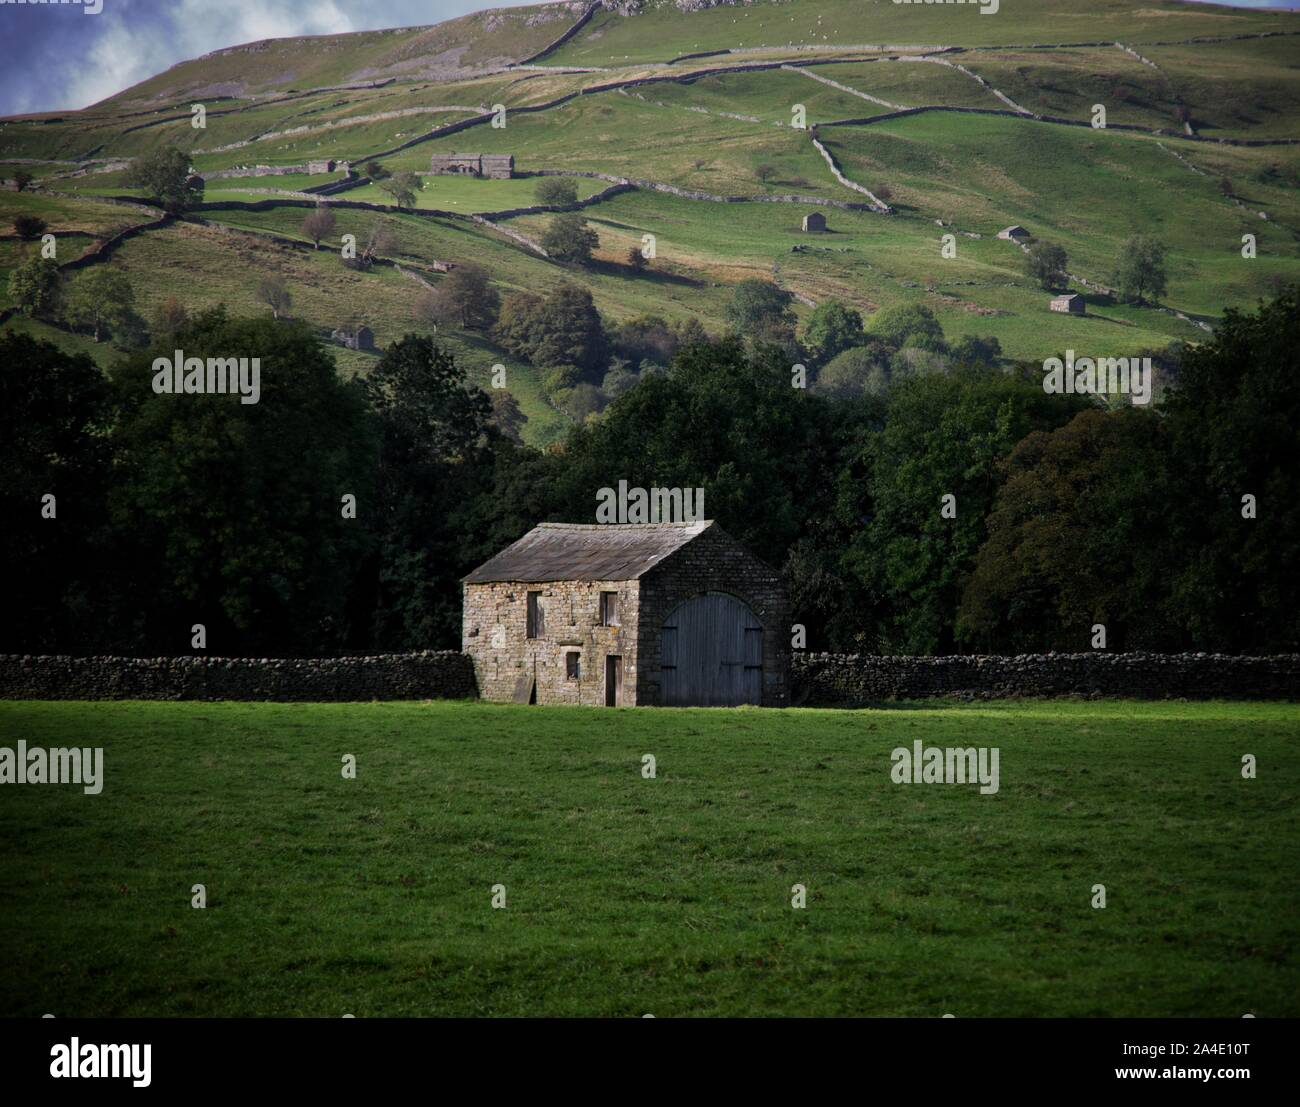 Chasing the sun shadows, stone field barn, Swaledale, Yorkshire Dales Stock Photo